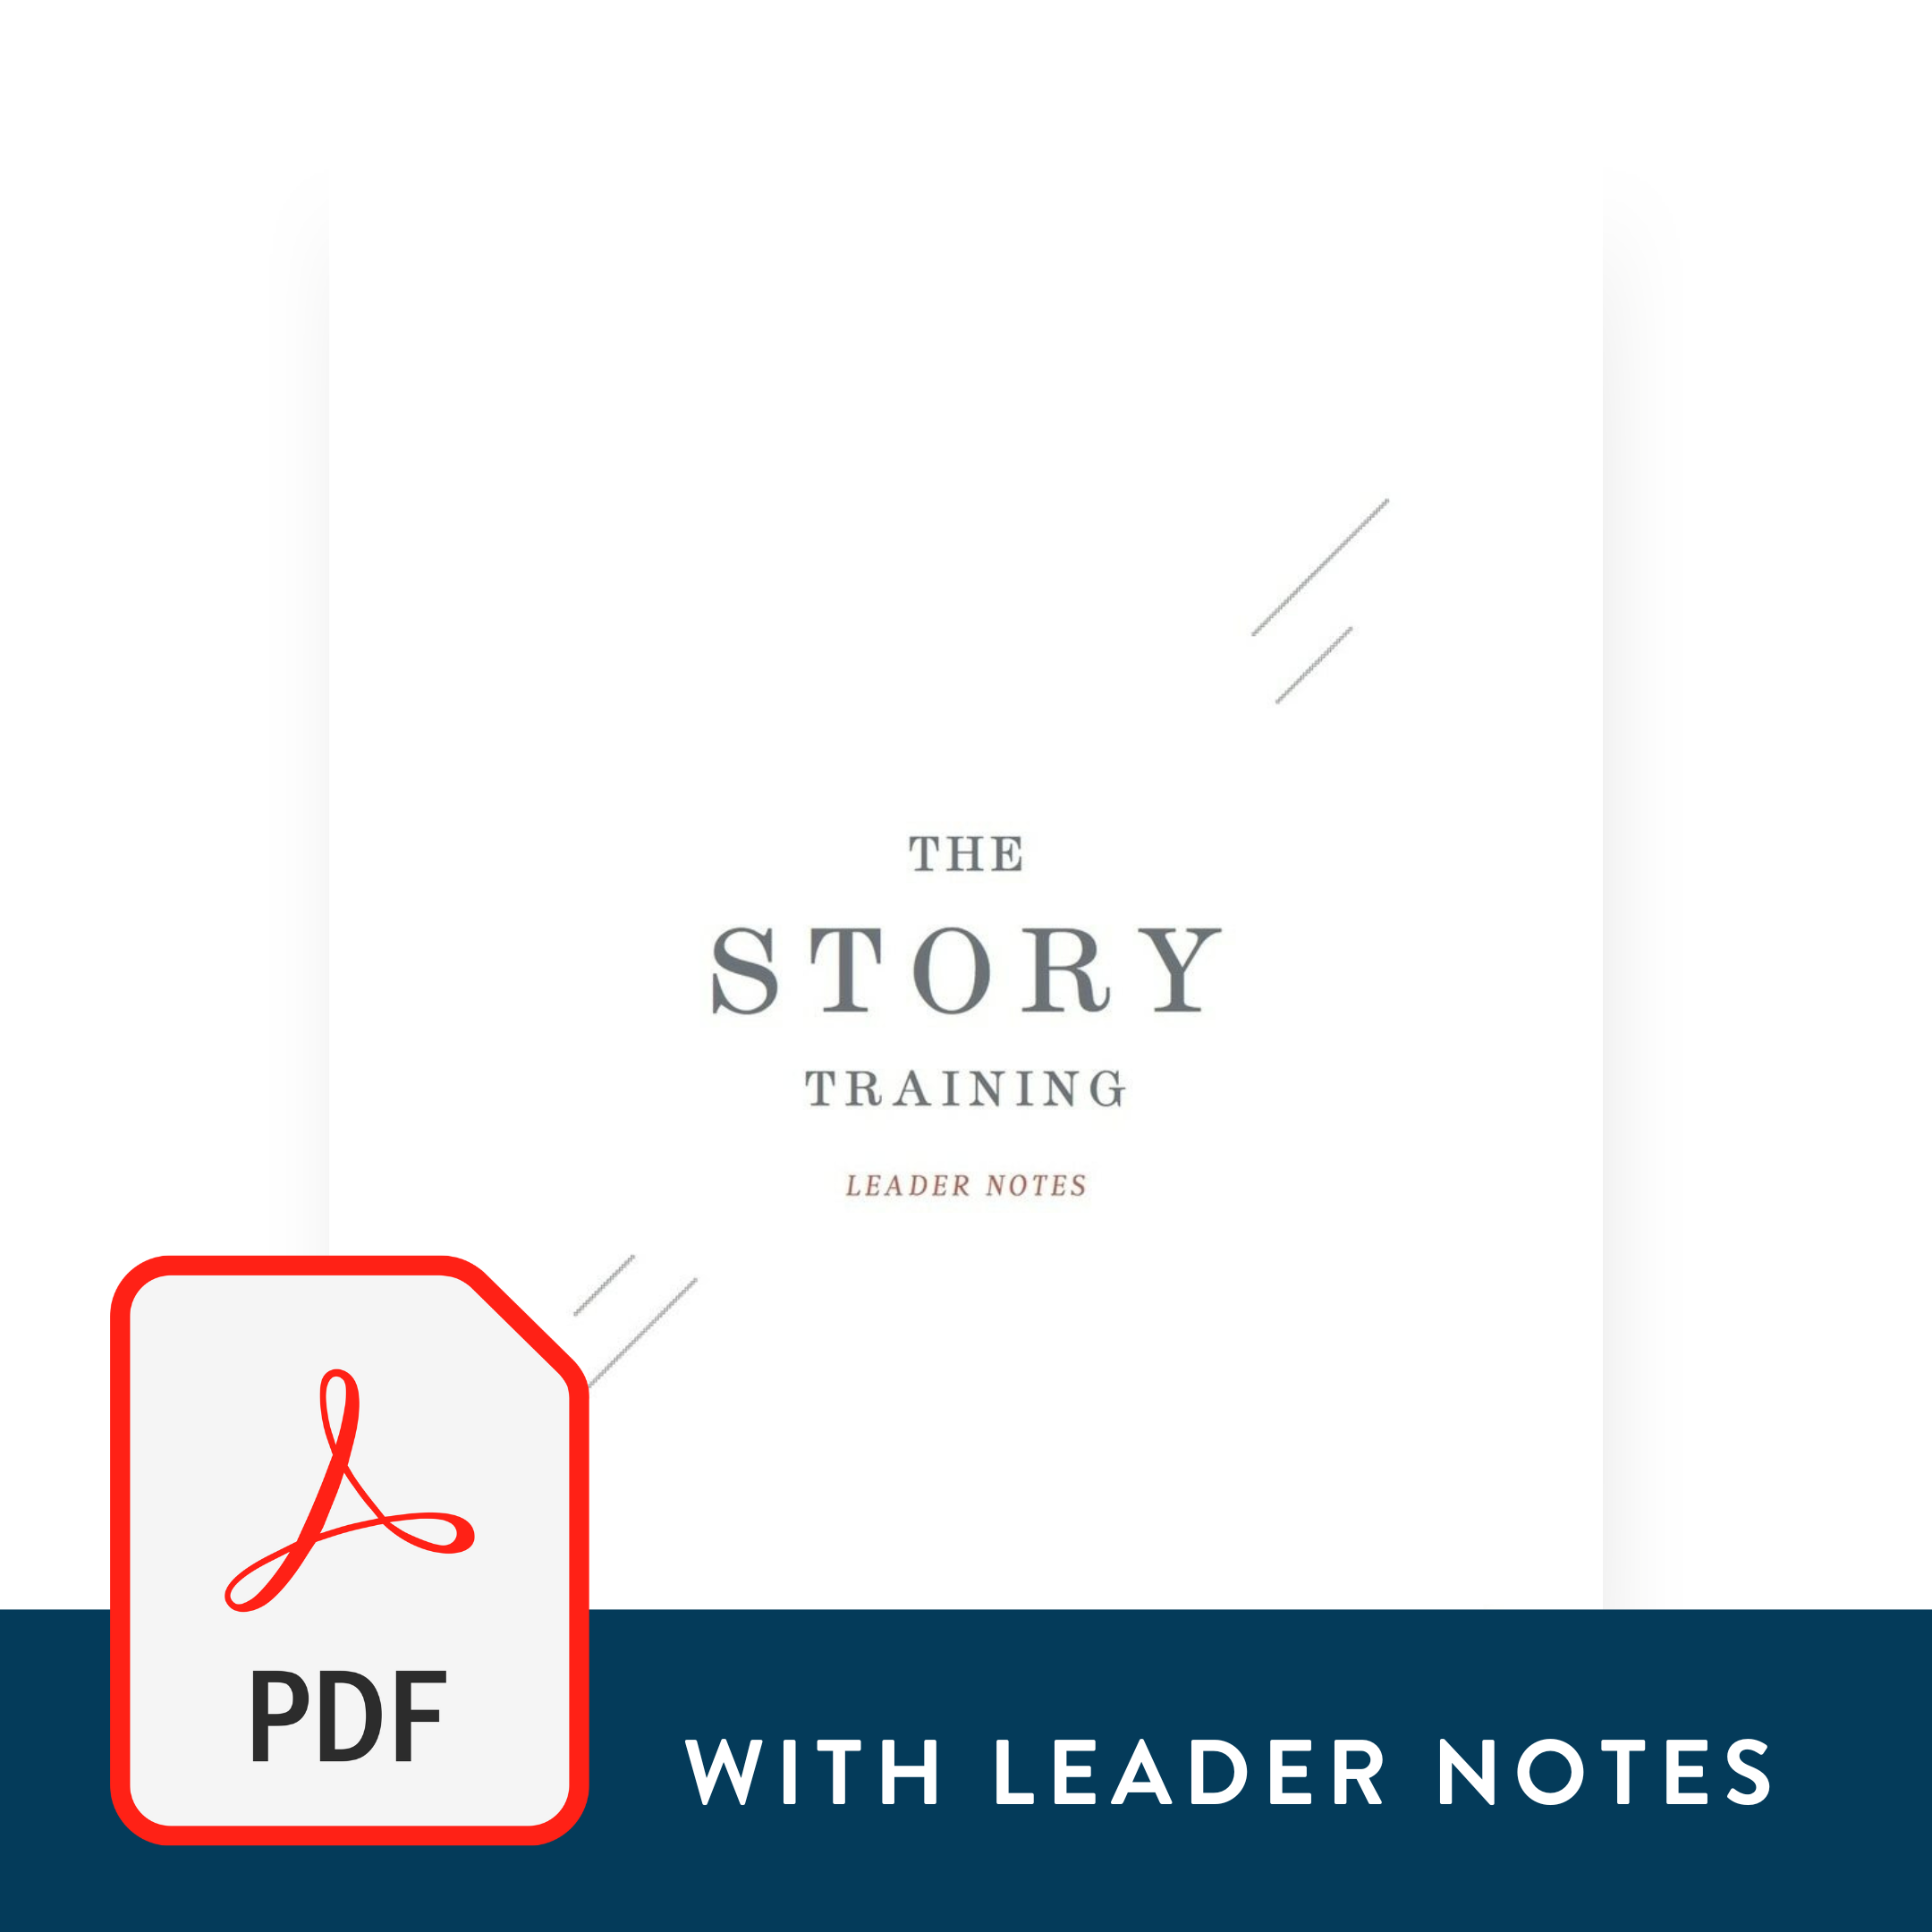 The Story Training with Leader Notes